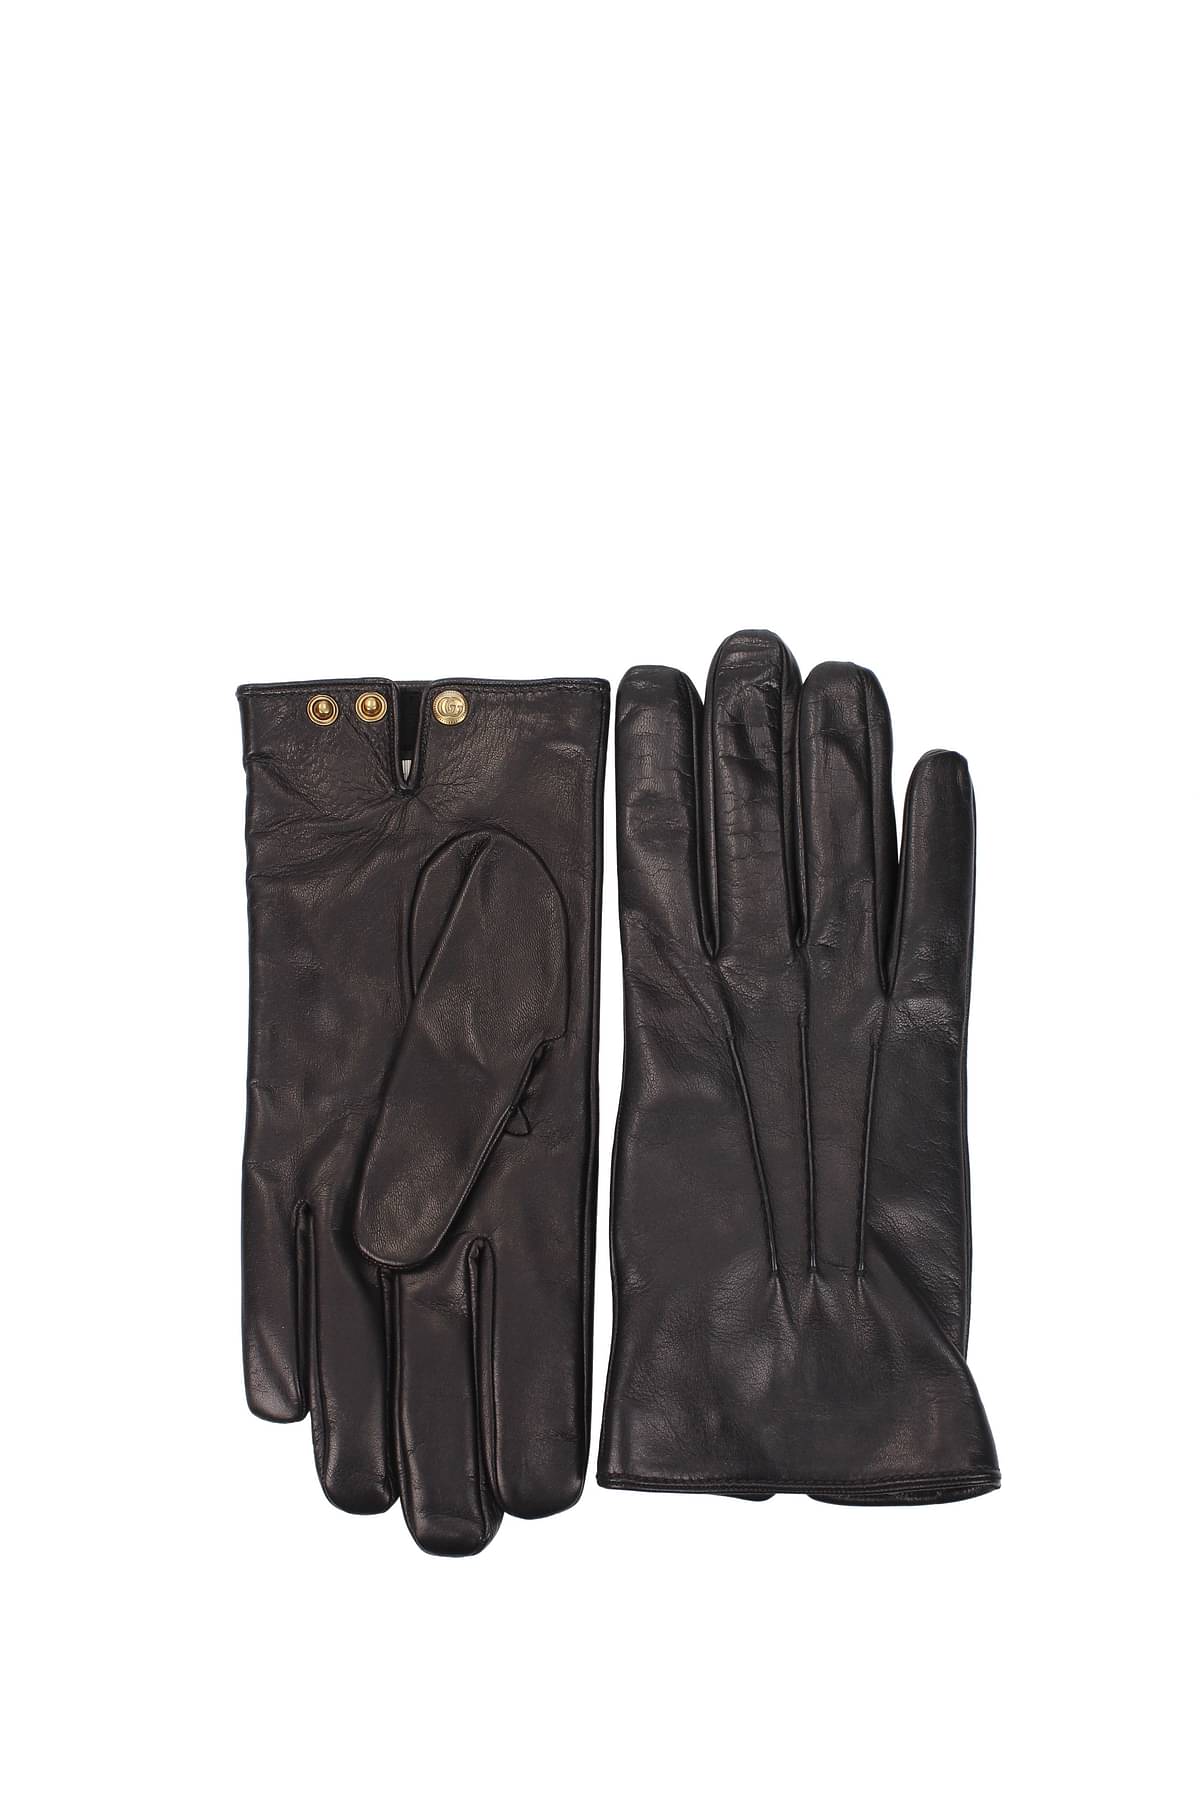 Gucci Gloves Men's 524061 BAP00 1000 Bee Black Lamb Leather & Cashmere (GGG1000)